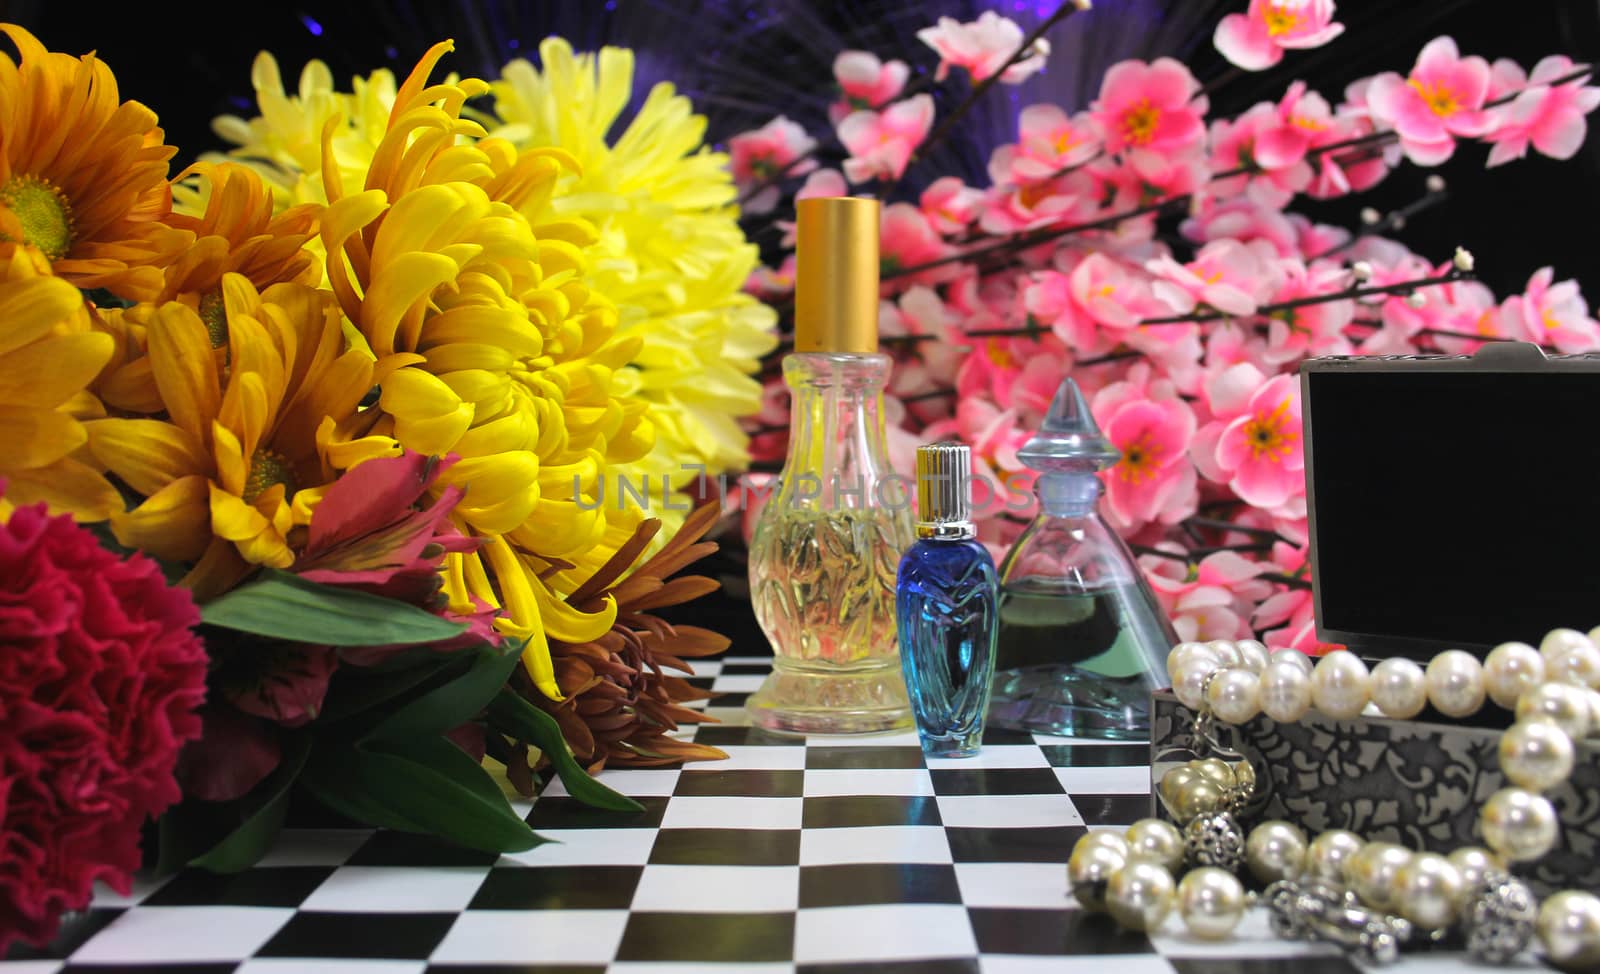 Yellow Flowers With Perfume and Jewelry on Vintage Table